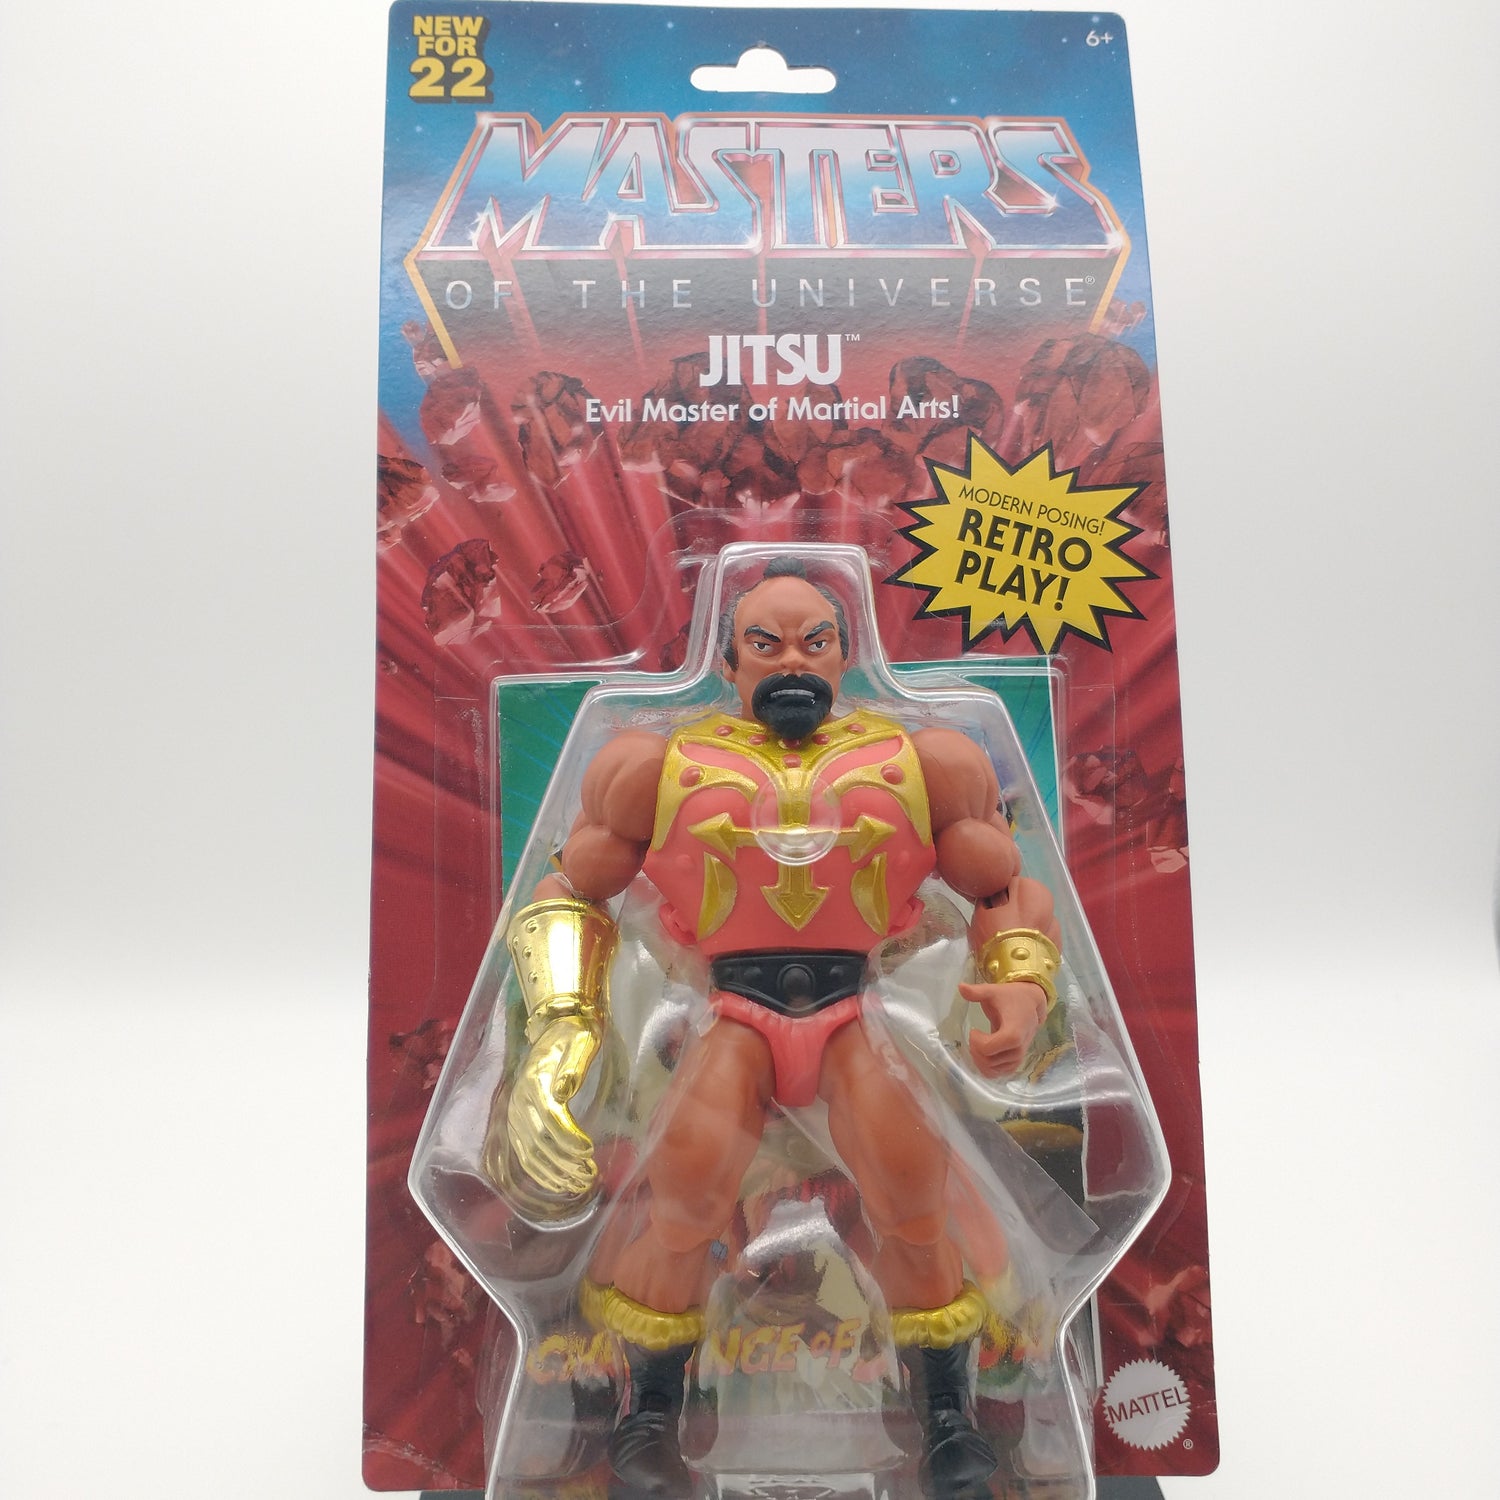 The front of the box and bubble. The bubble is sealed, the action figure inside has a dark complexion and is wearing a red leotard with gold detailling. His left hand is golden.